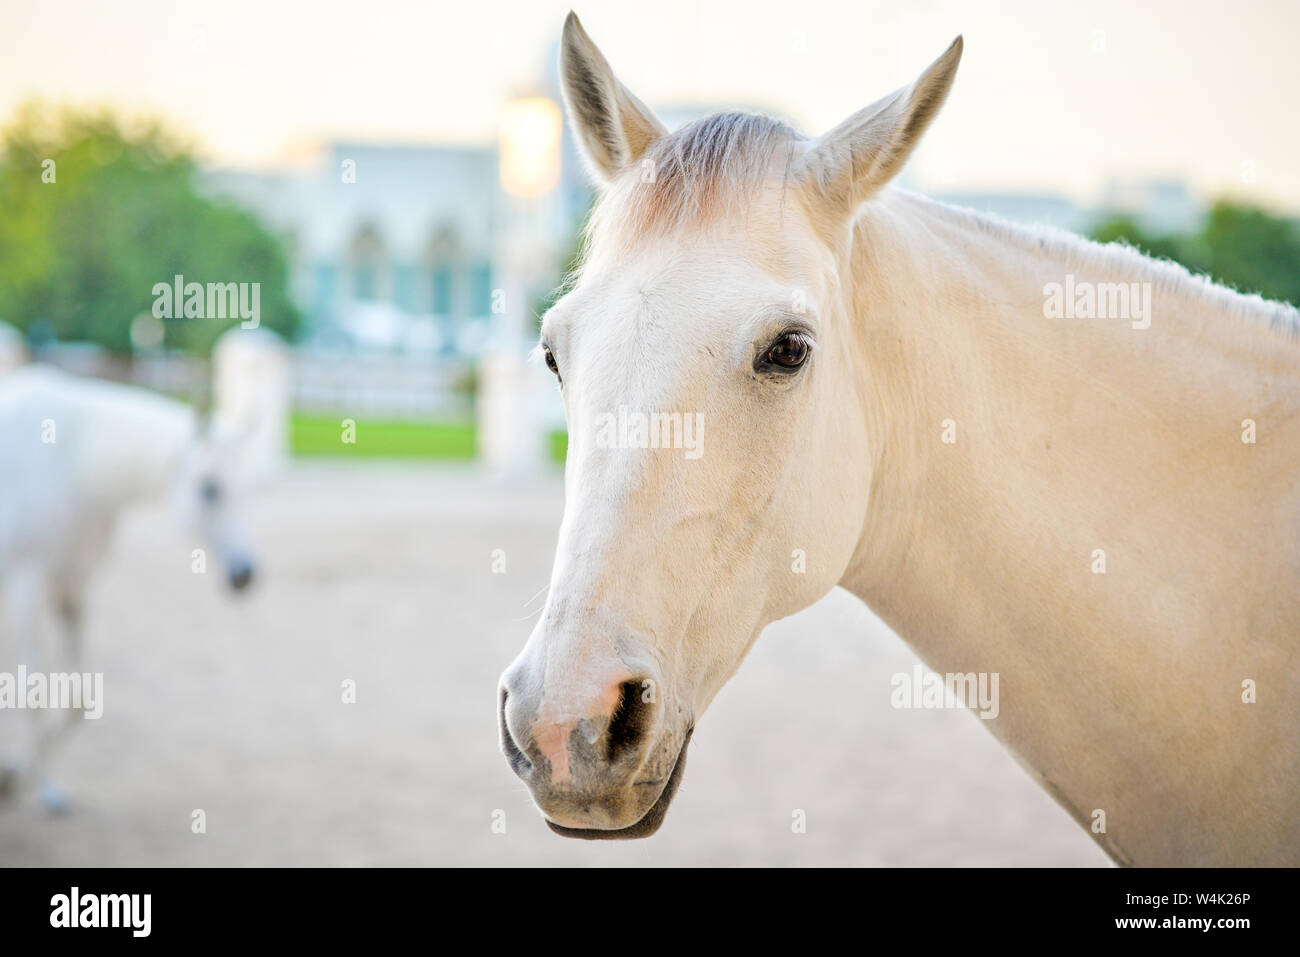 DOHA, QATAR - JANUARY 23, 2016:  Head of a white horse taken at the stable of the Doha souq at sunset during winter Stock Photo